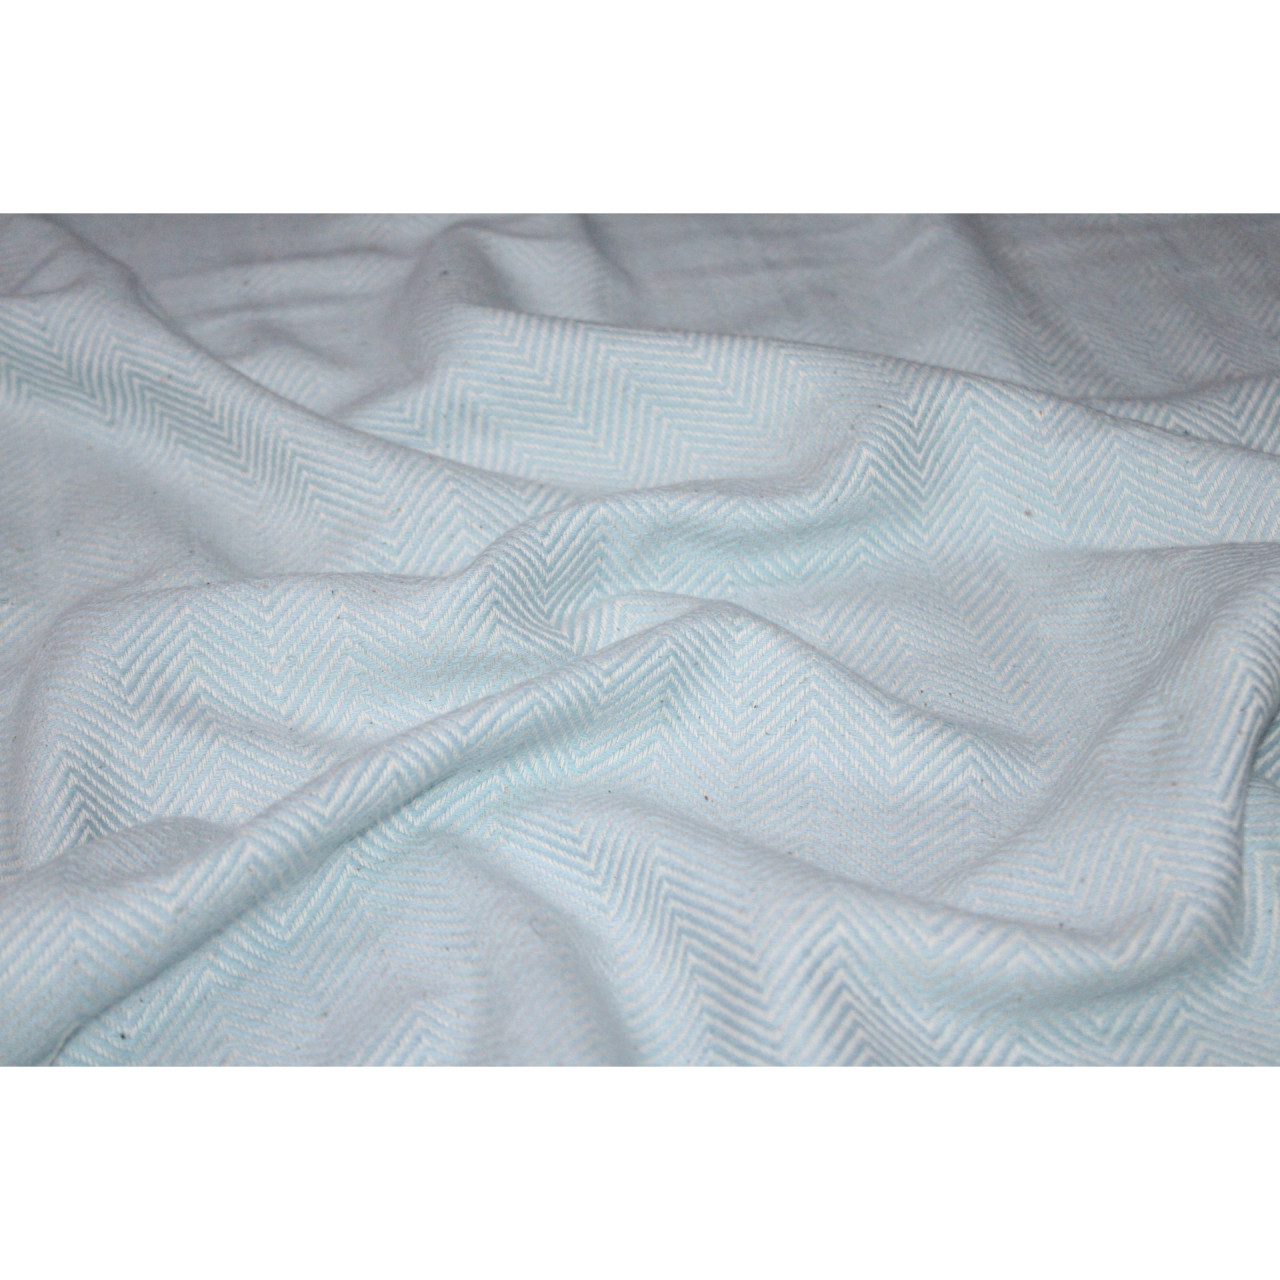 (1439) Cotton and khadi  Azo-free dyed throw from Bihar - Sky blue, piped fringes, textured, white